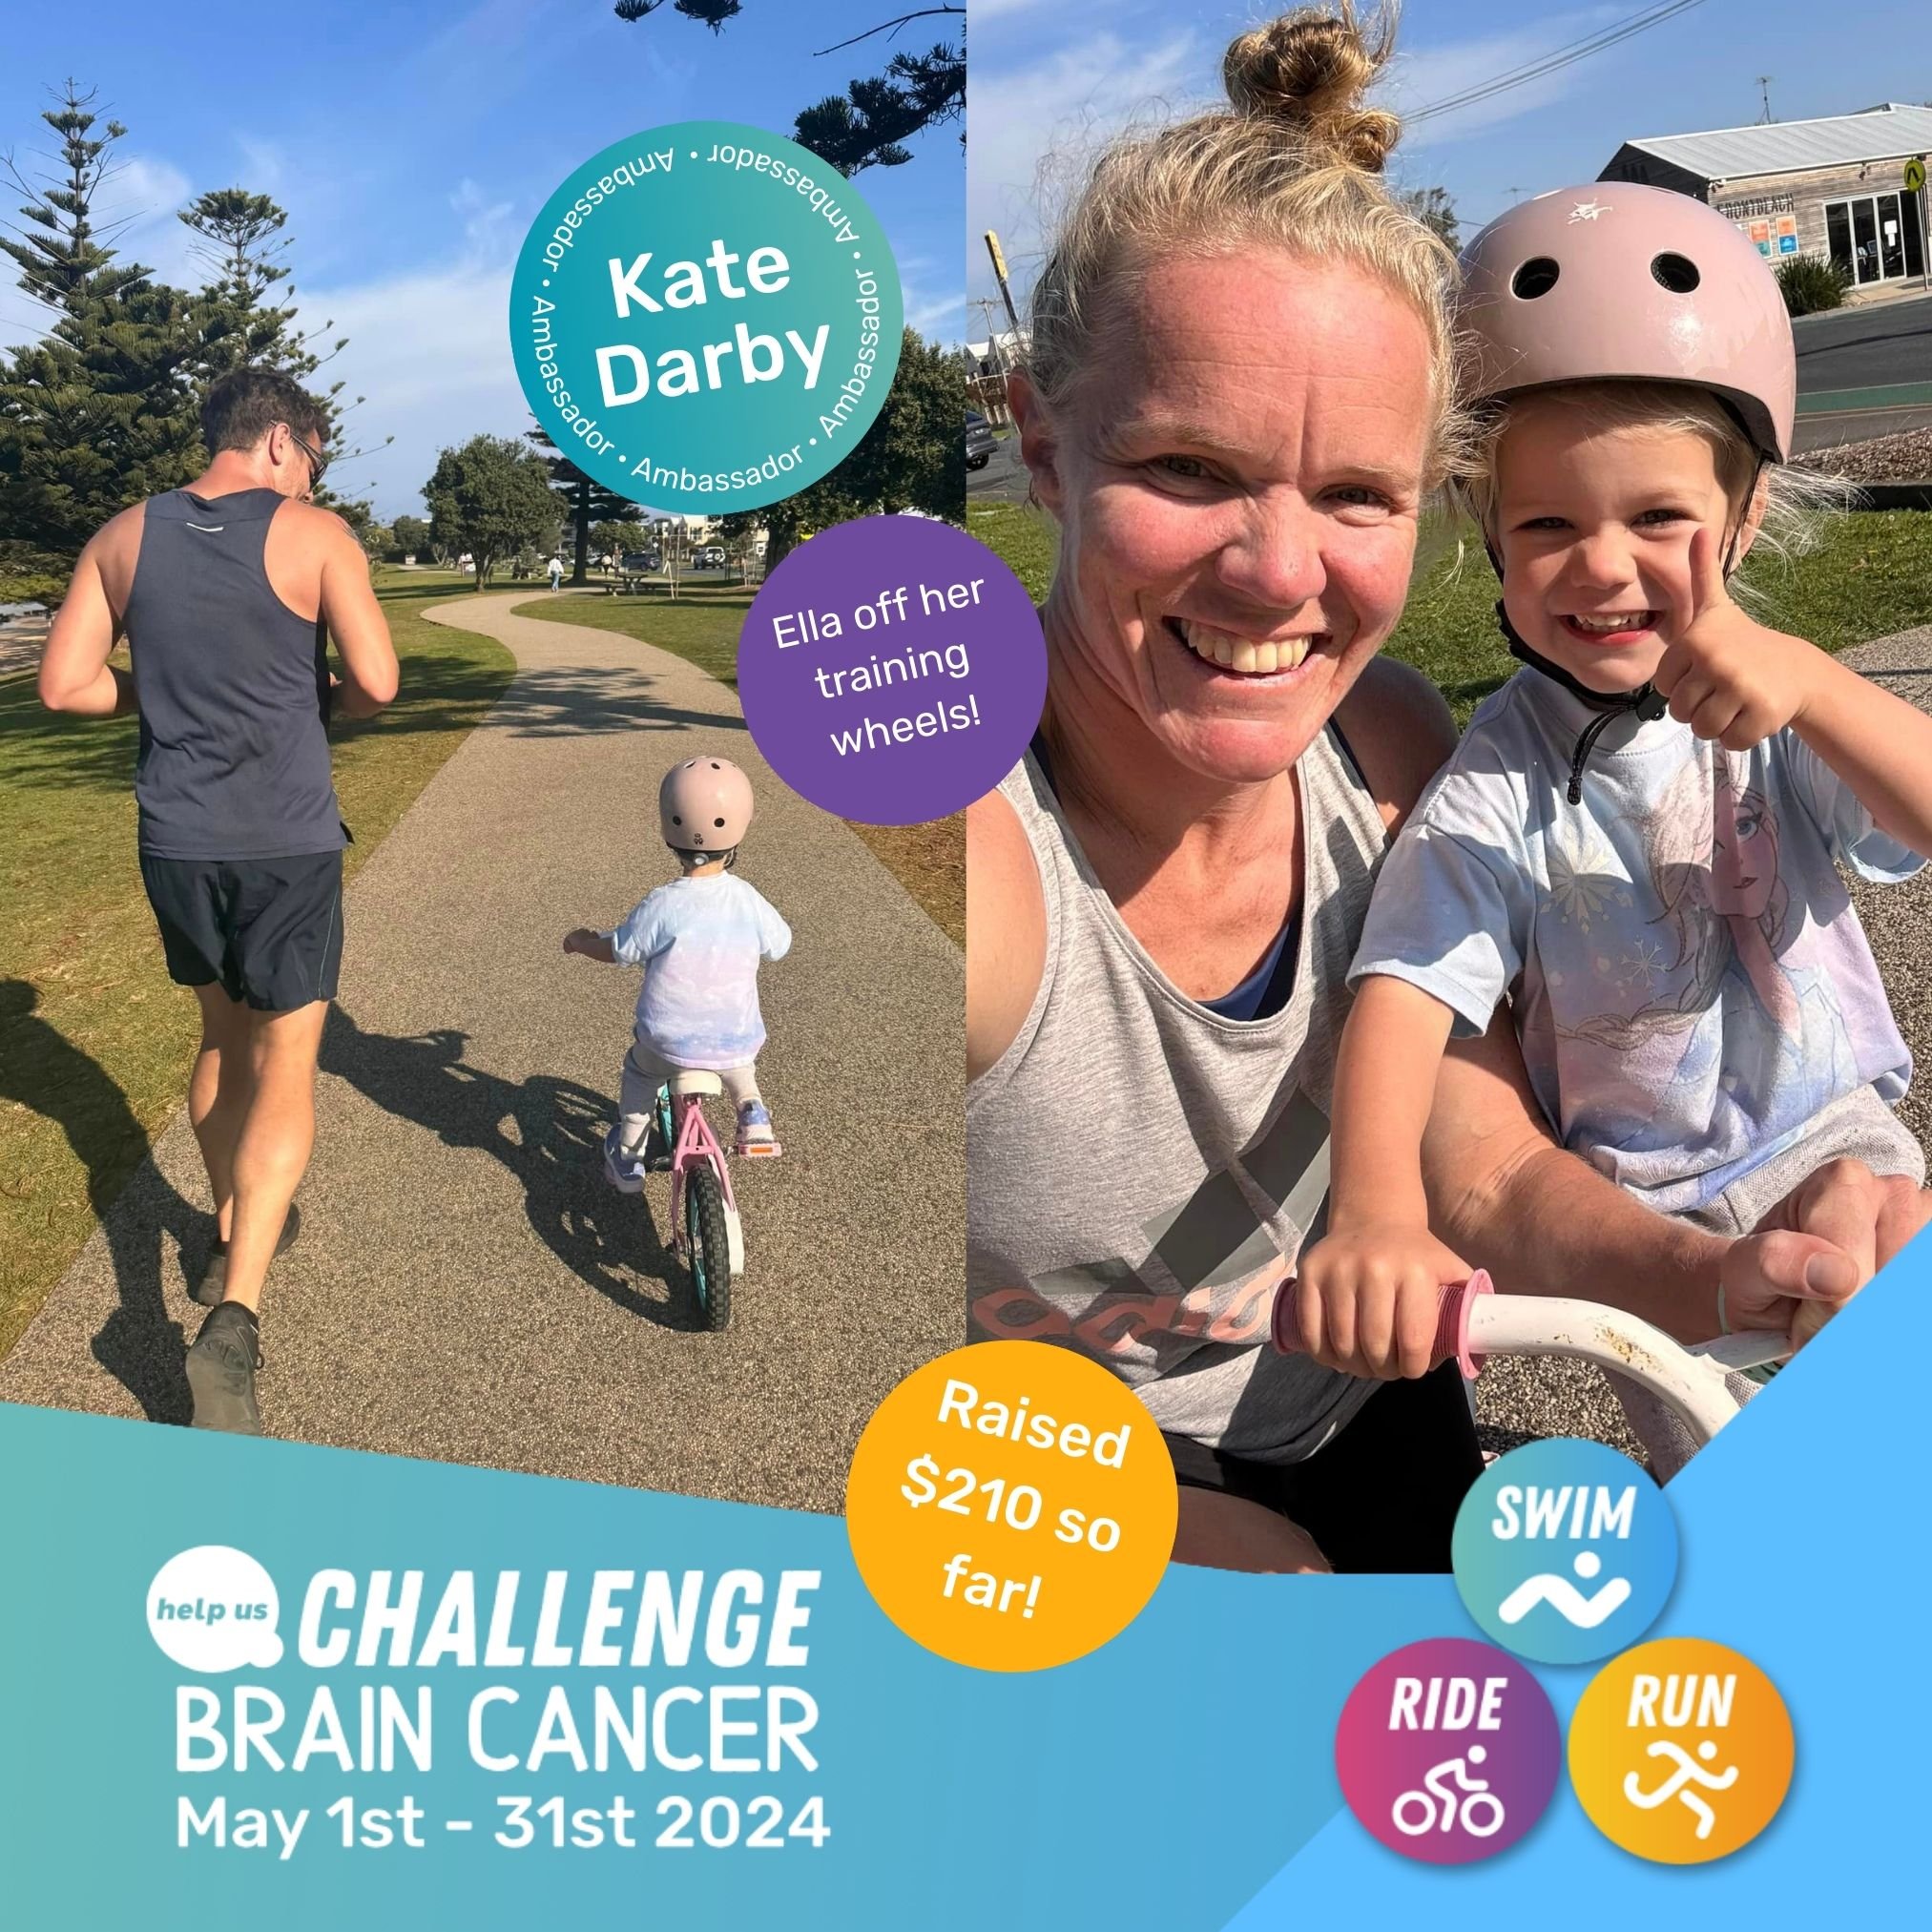 Challenge Brain Cancer week two! Our challengers have raised an incredible $34000 so far for brain cancer patients, families, and carers across Australia by riding, running, and swimming. This is an incredible effort from all participating!! We've lo